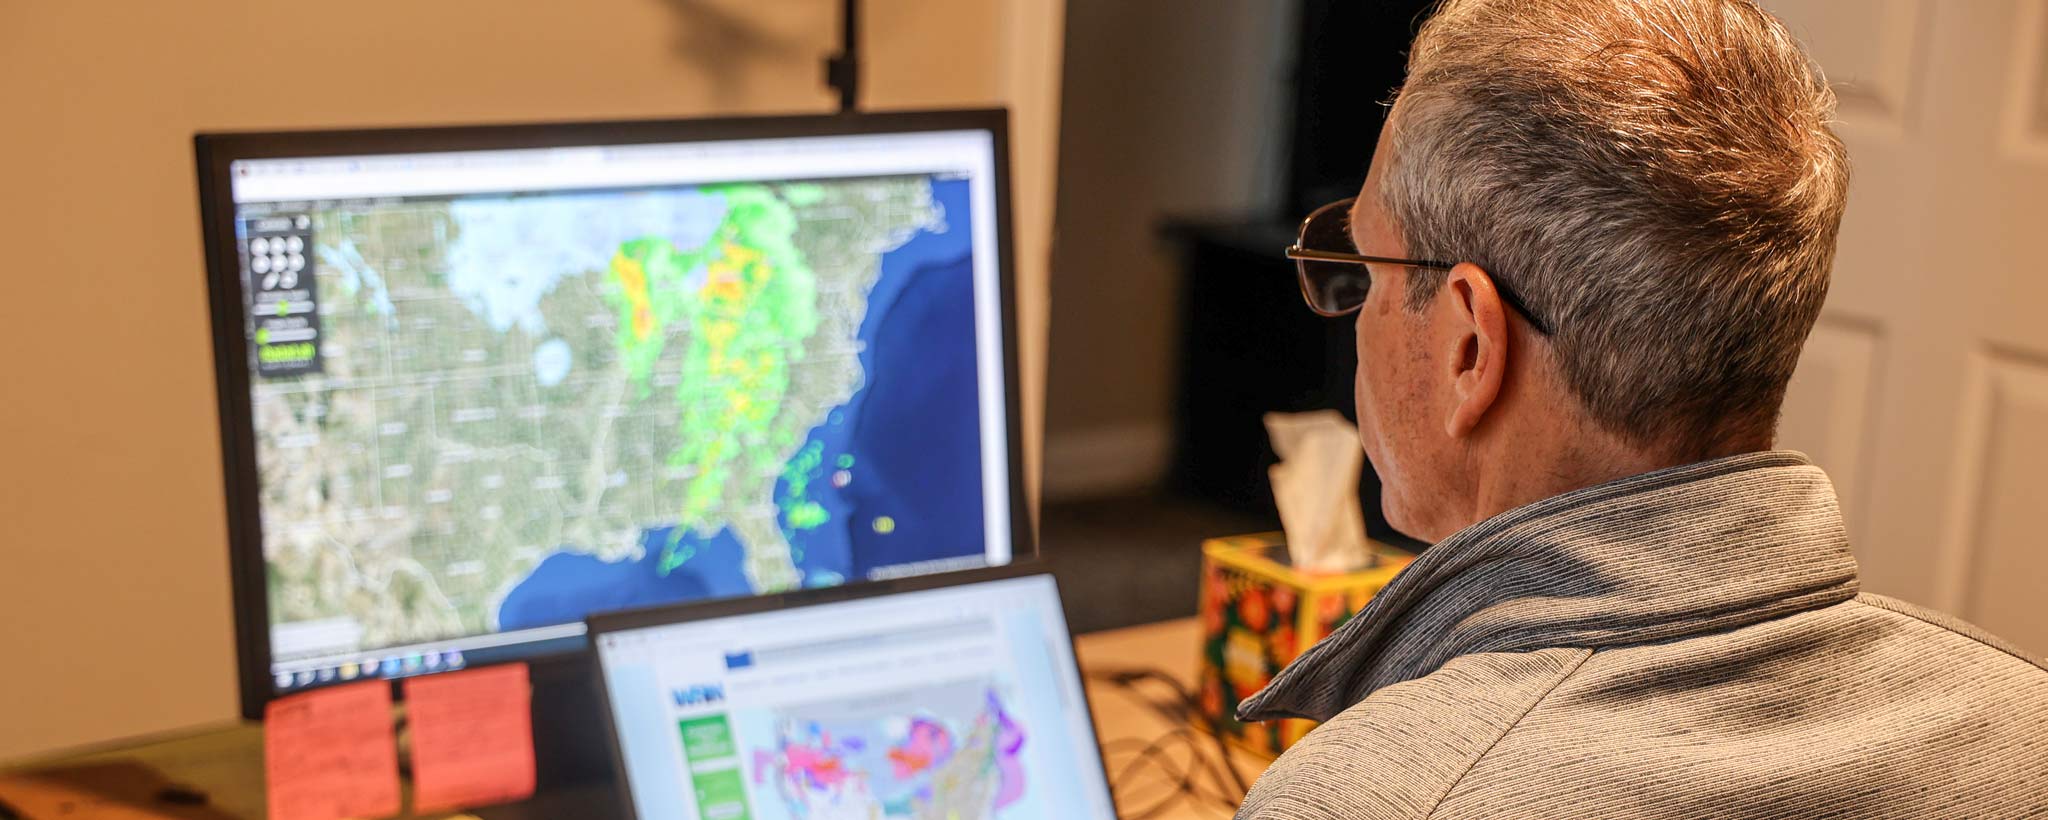 Meteorologist studying weather pattern on computer screens